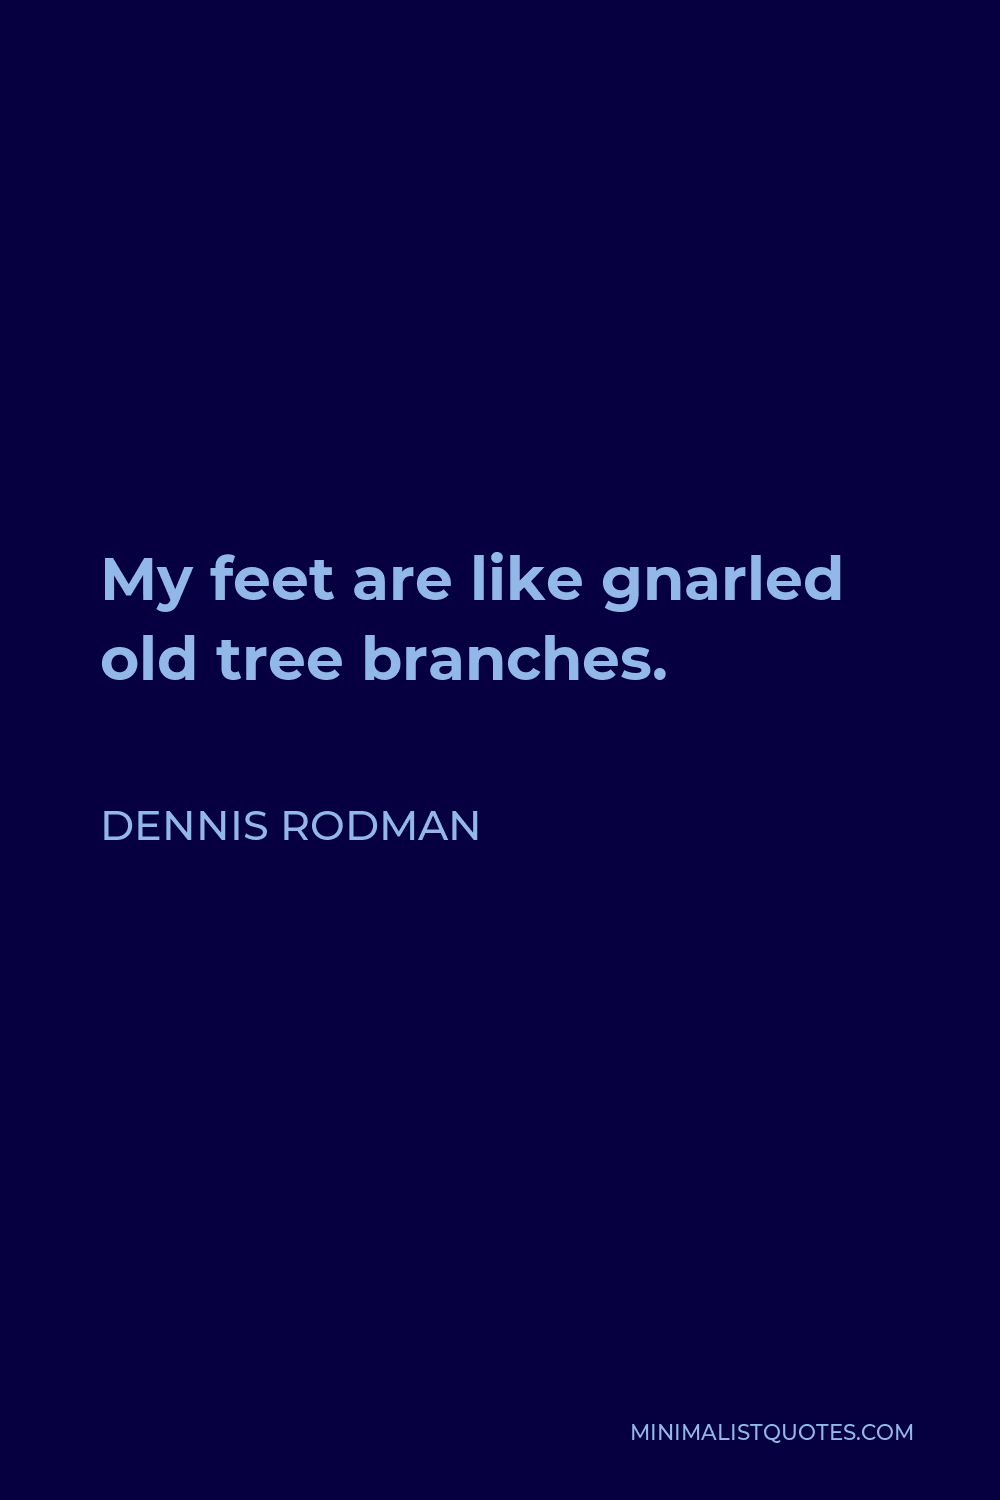 Dennis Rodman Quote - My feet are like gnarled old tree branches.